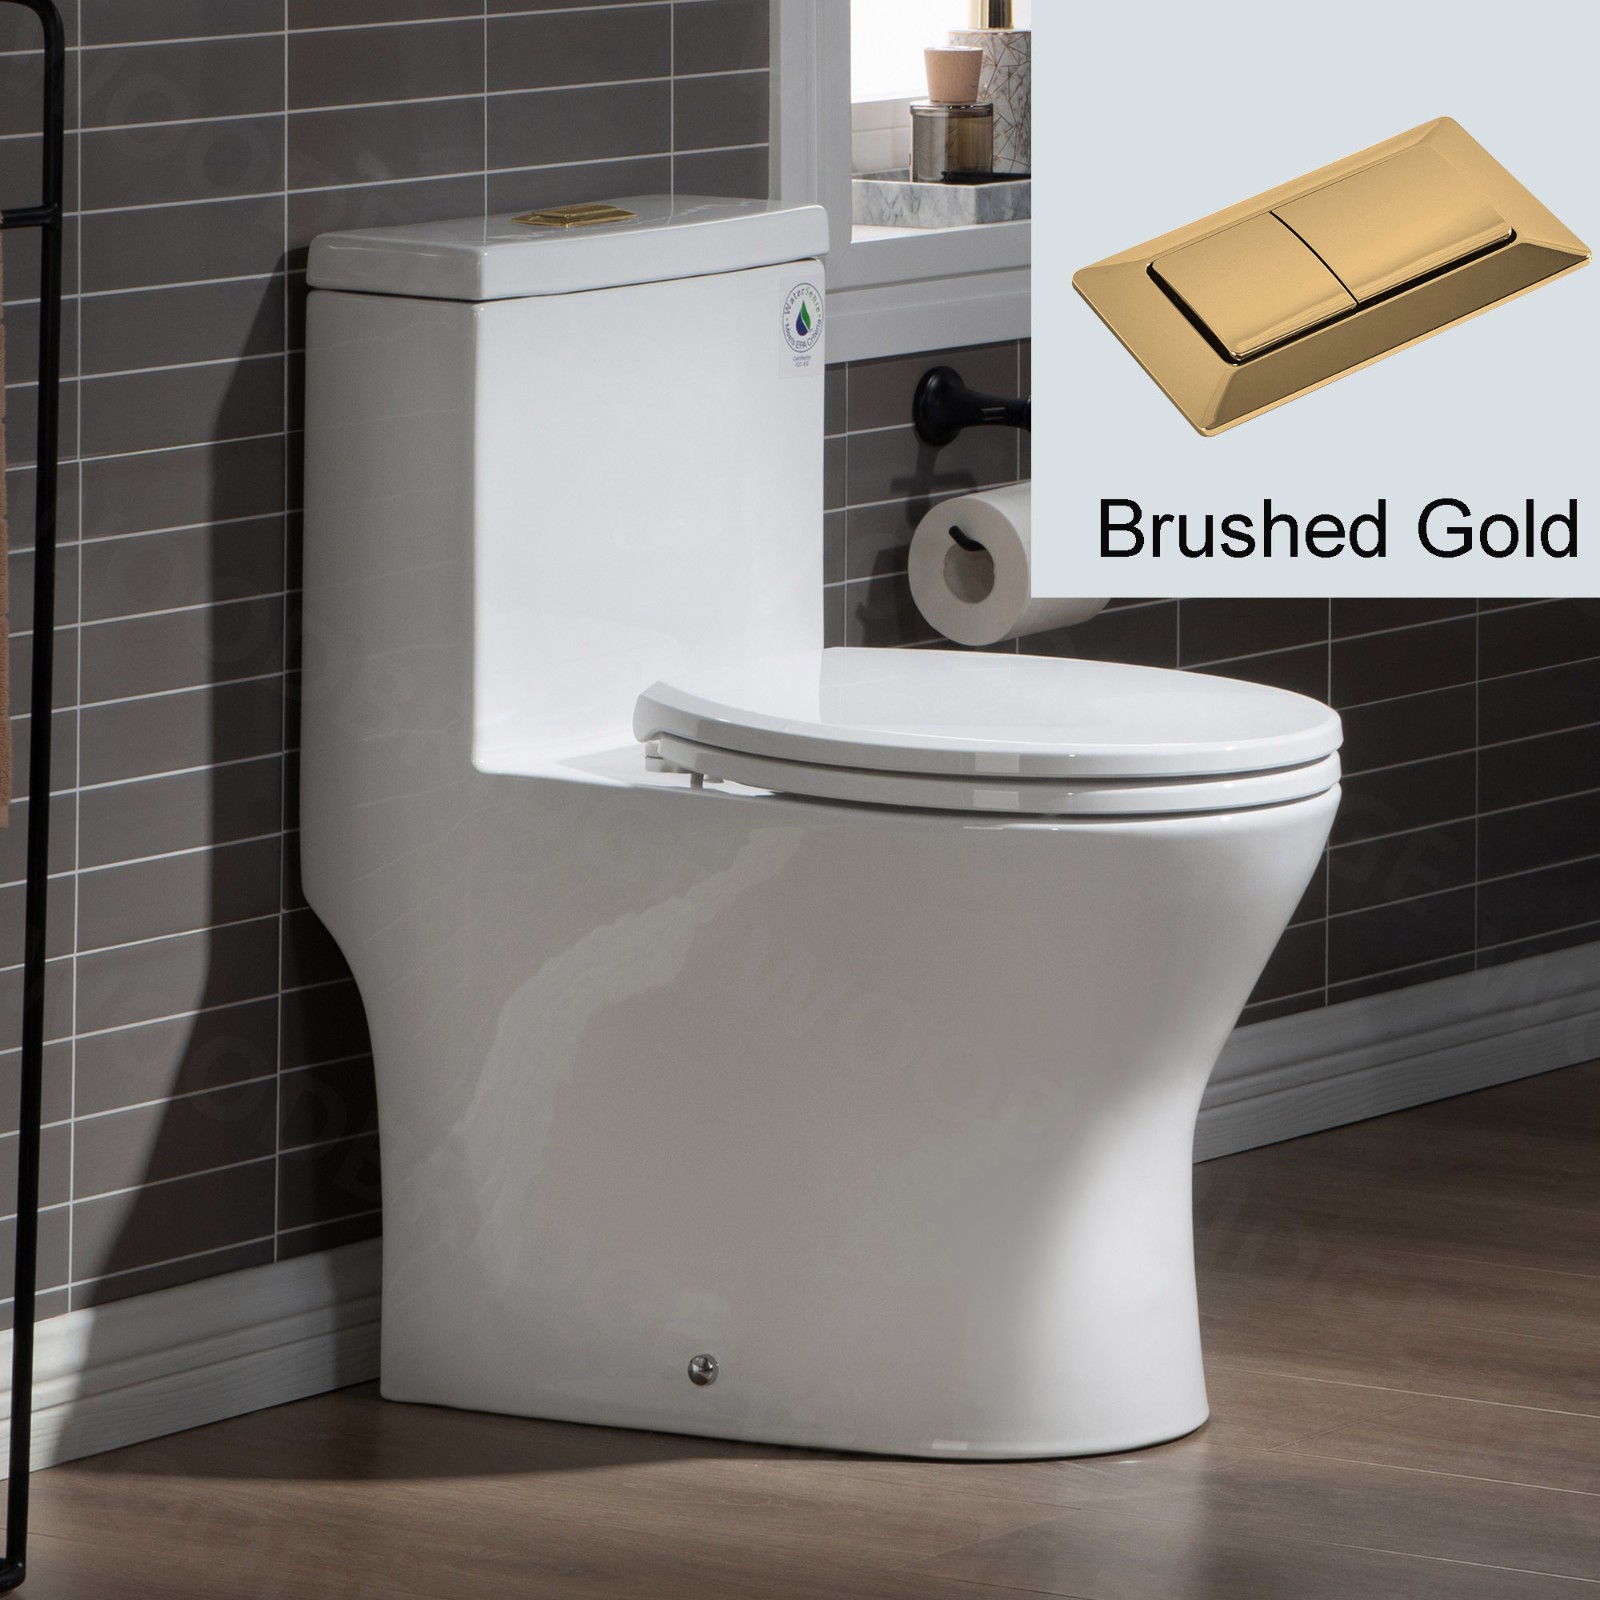  WOODBRIDGE One Piece Short Compact Bathroom Tiny Mini Commode Water Closet Dual Flush Concealed Trapway, Brushed Gold Button B0500-BG, White_5659